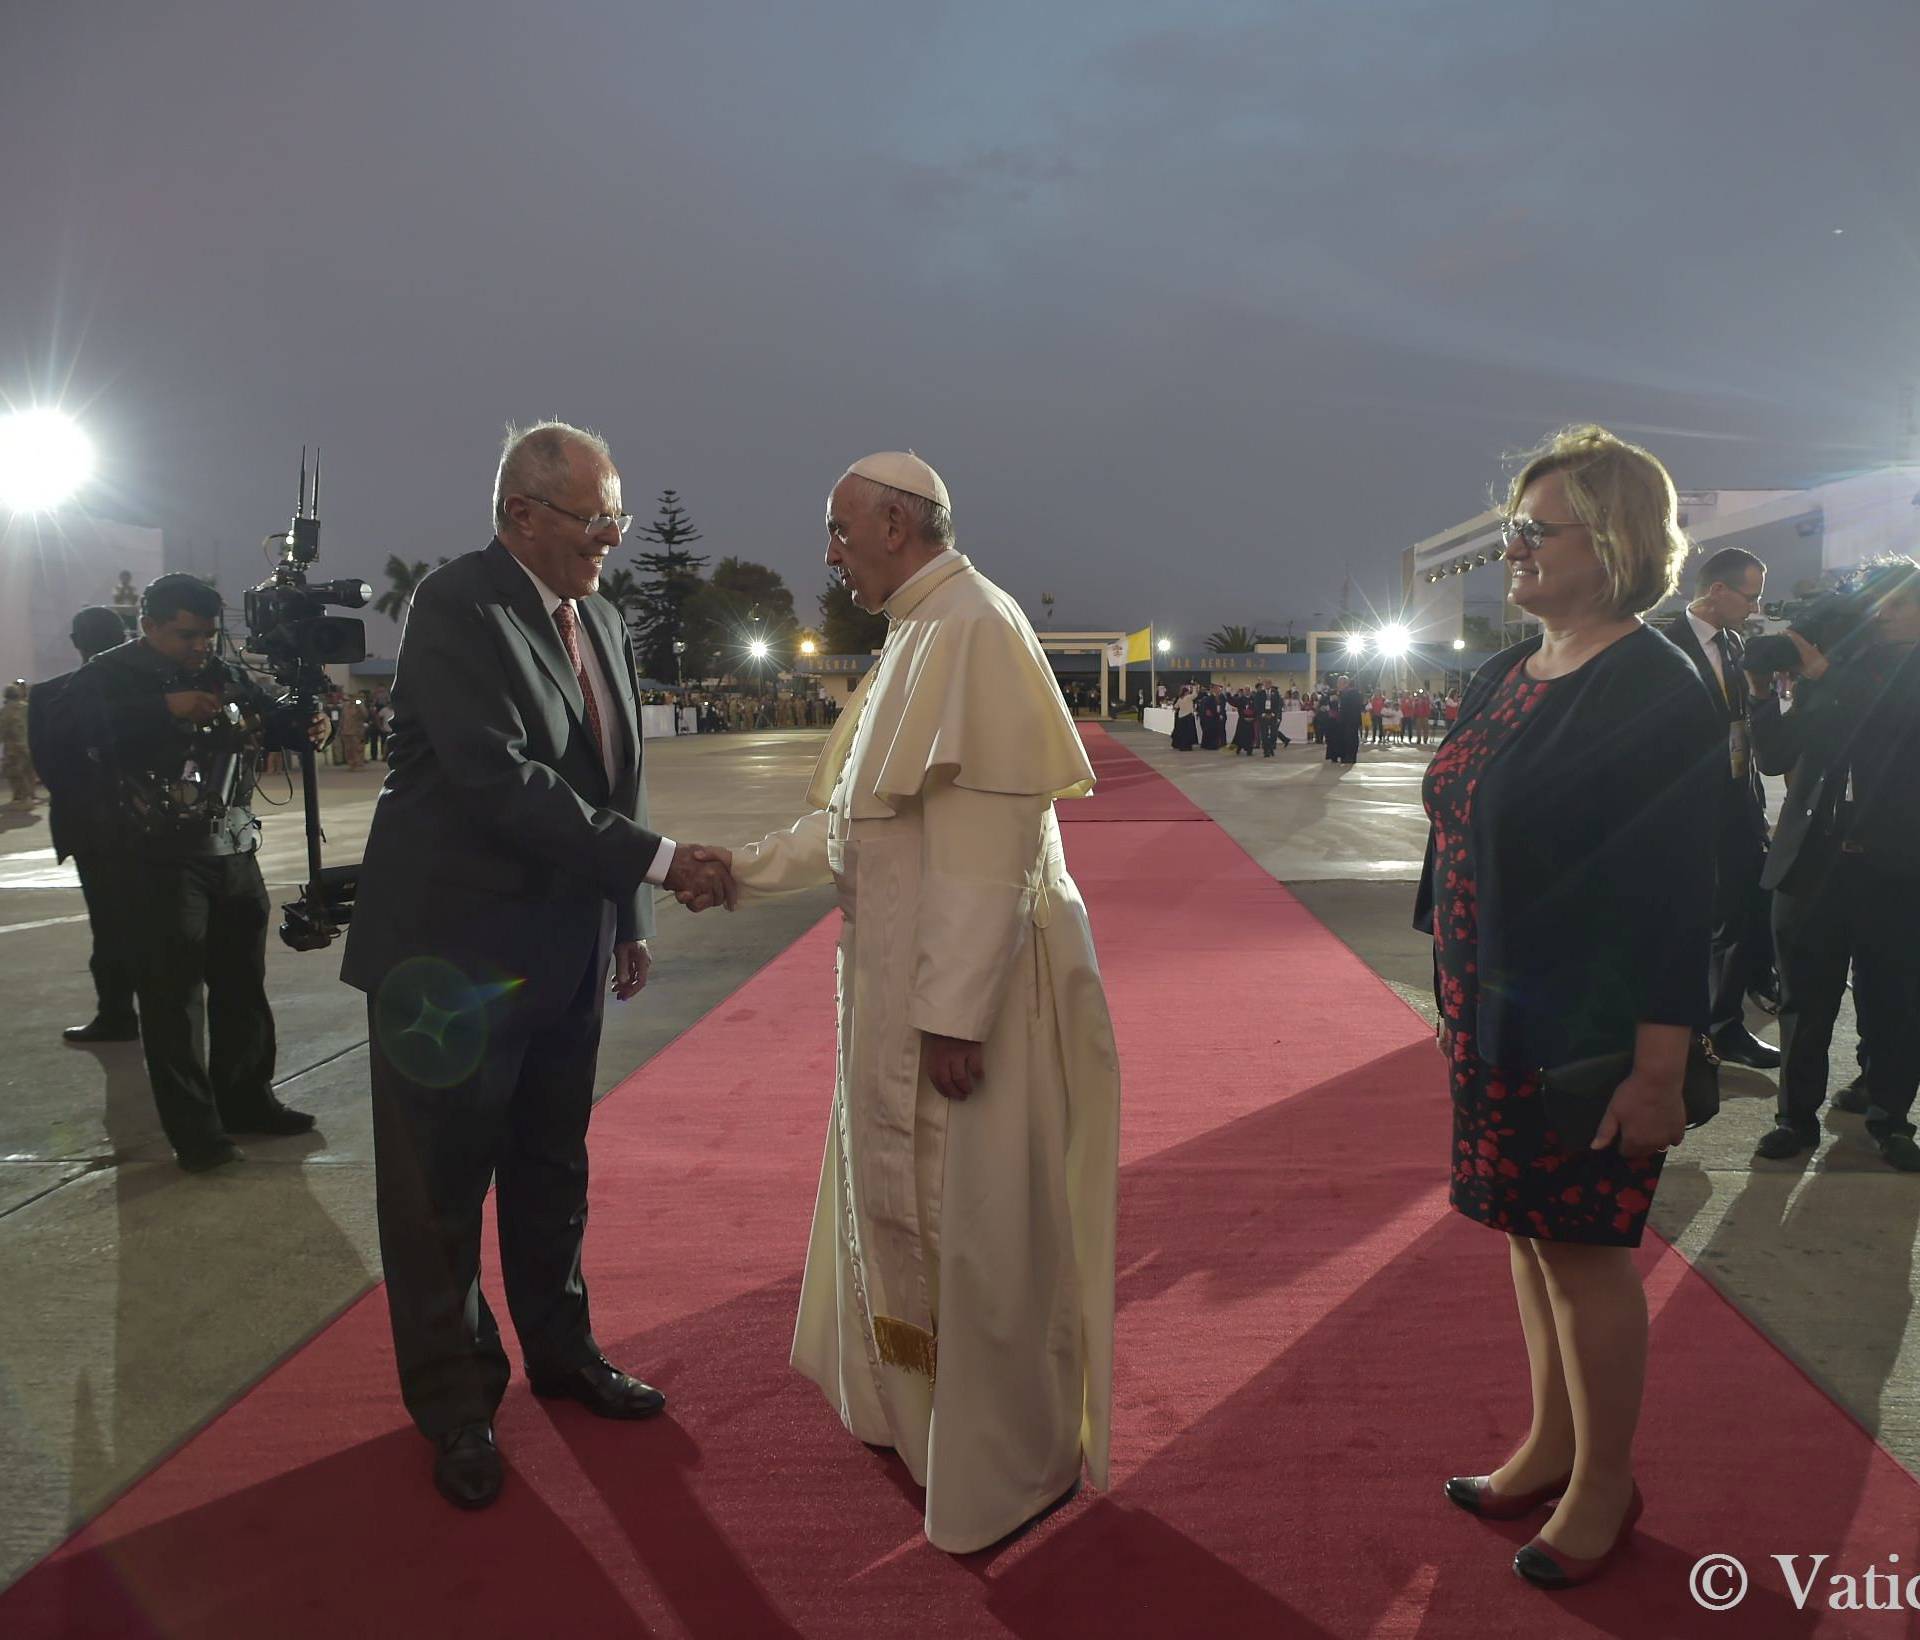 Pope Francis shakes hands with Peru's President Pedro Pablo Kuczynski during a farewell ceremony at Lima's airport before departing Lima